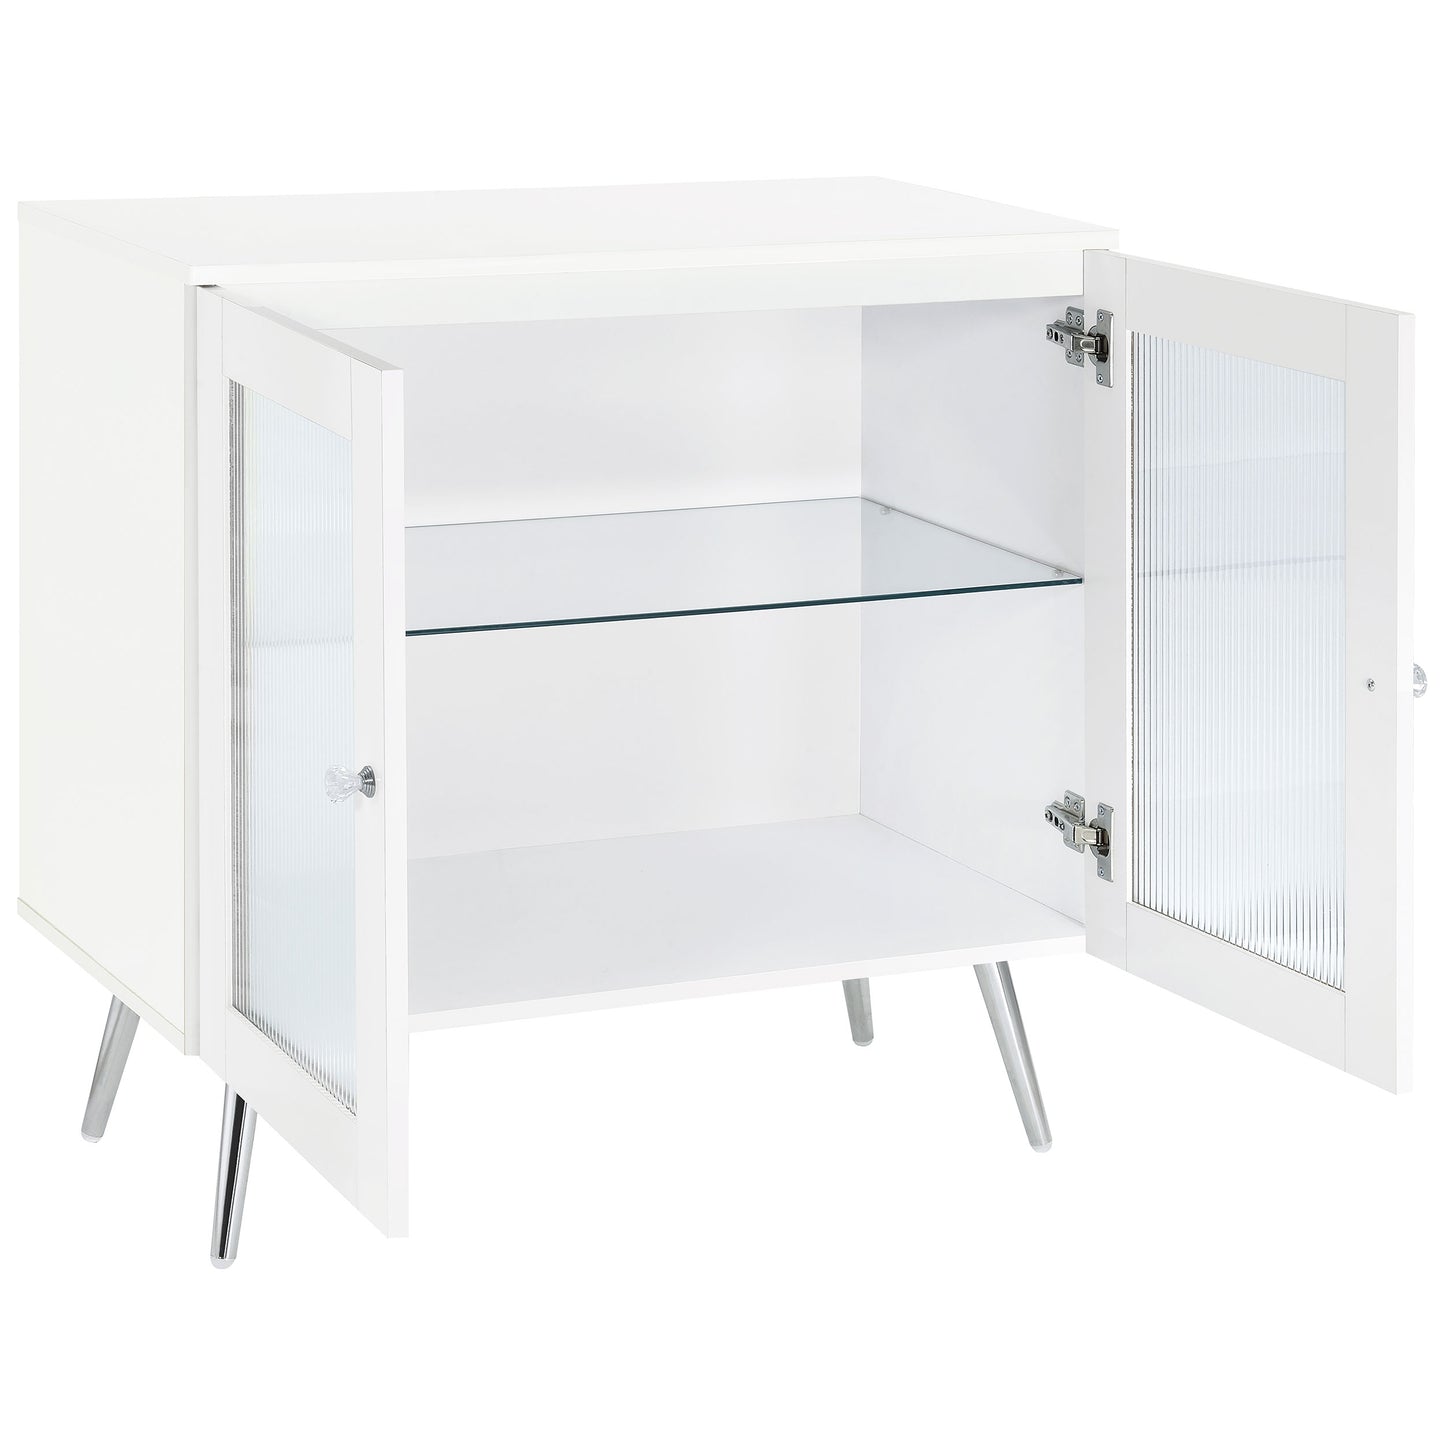 Nieta 2-tier Accent Cabinet with Glass Shelf White High Gloss and Chrome